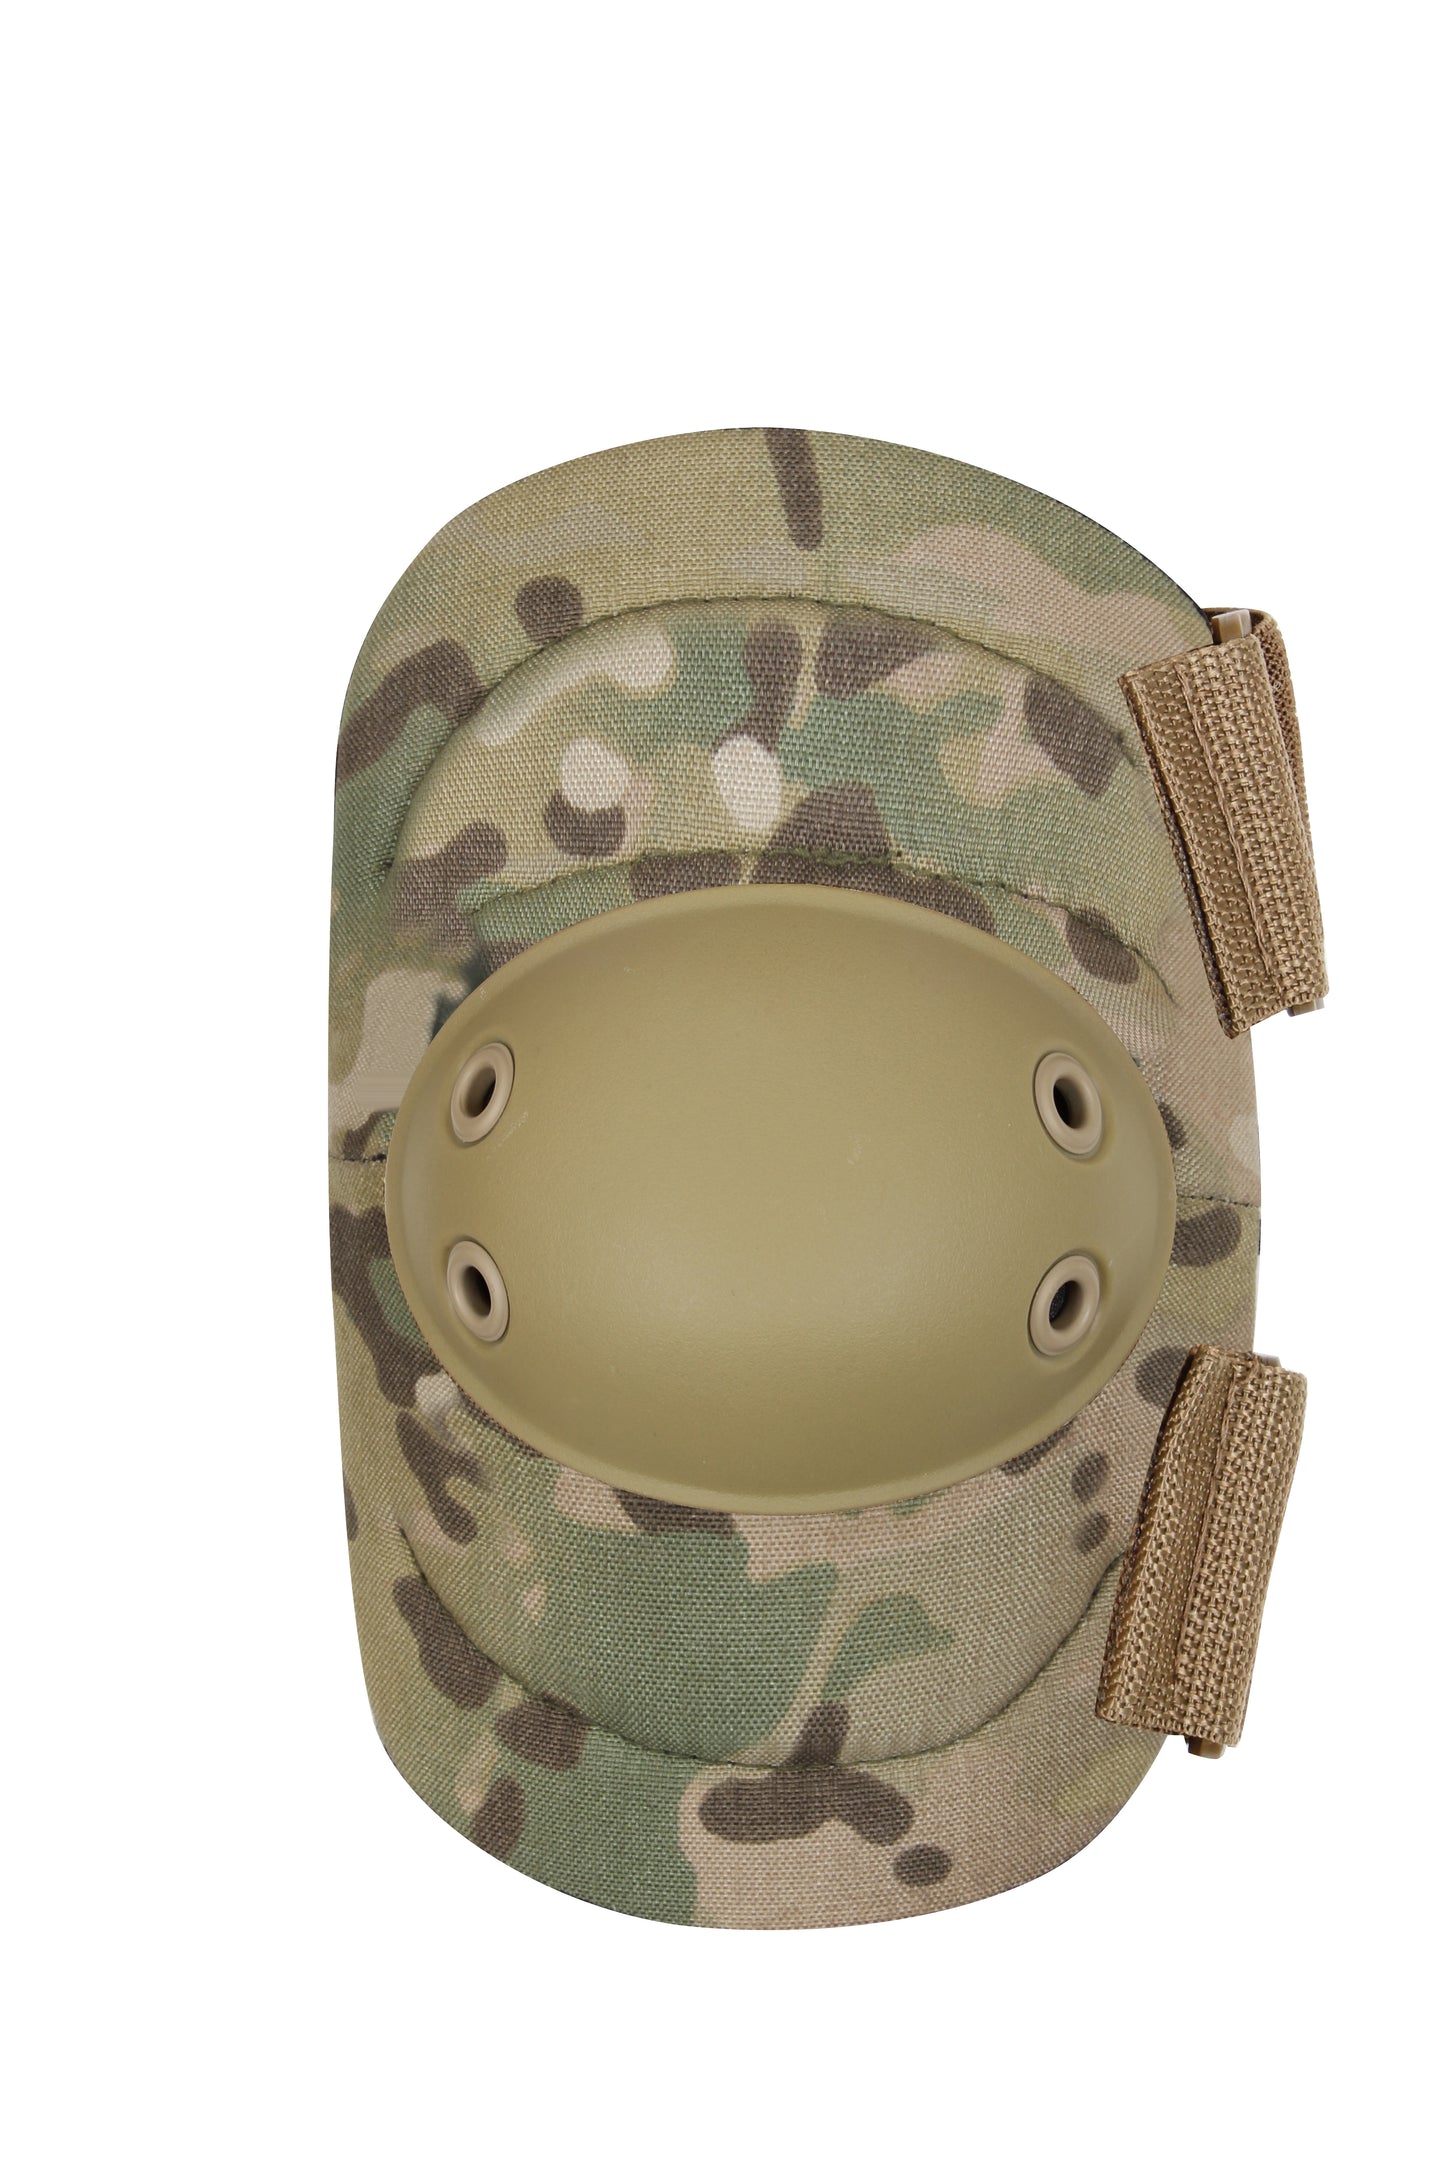 Rothco Multi-Purpose Swat Elbow Pads - Solid & Camo Colors